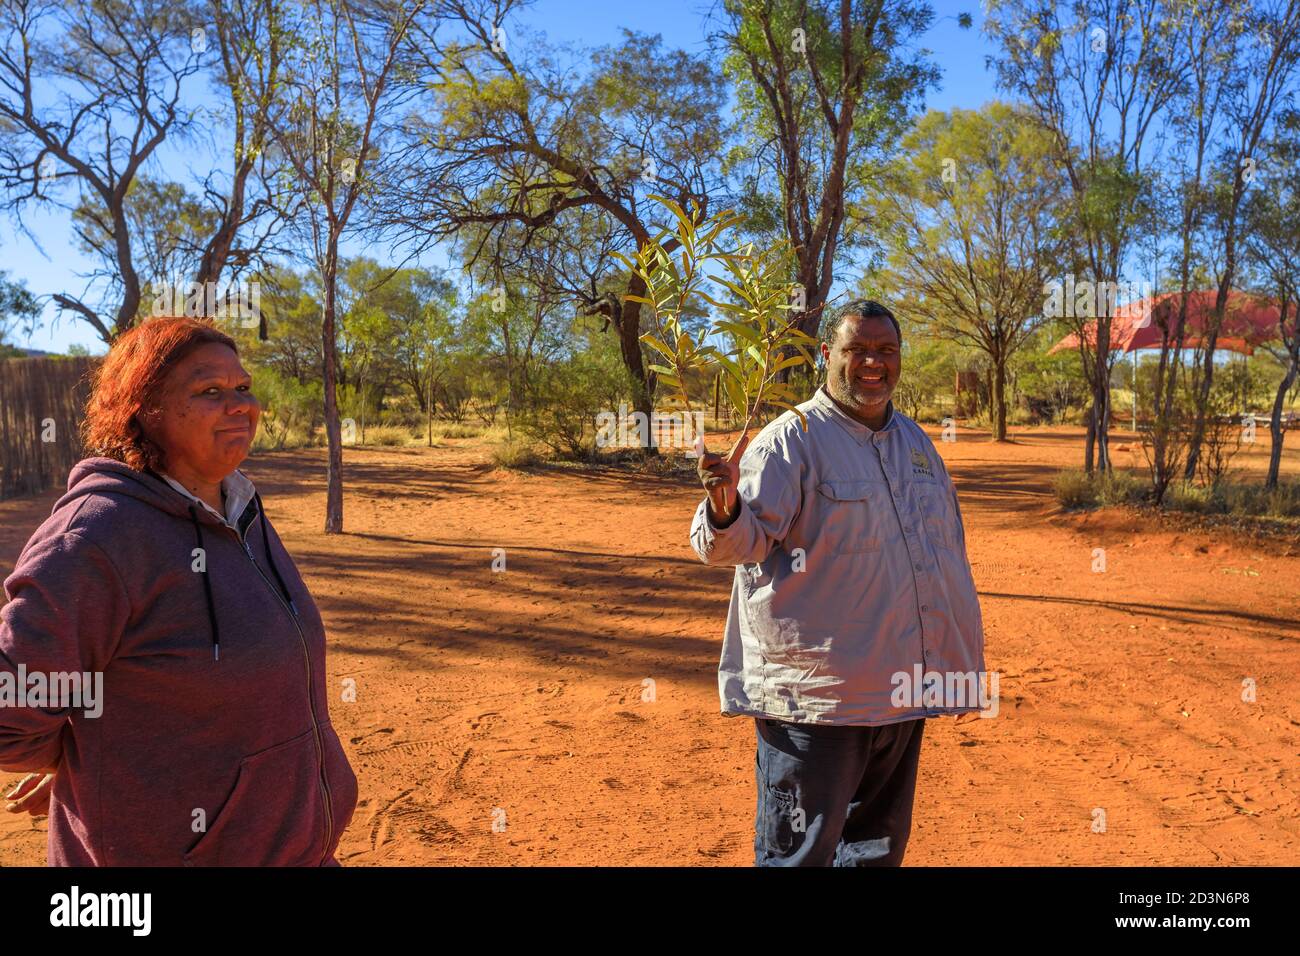 Kings Creek, Australia - Aug 21, 2019: Australian aboriginal native guides shows the bush plants used during the traditional ceremonies of local Stock Photo